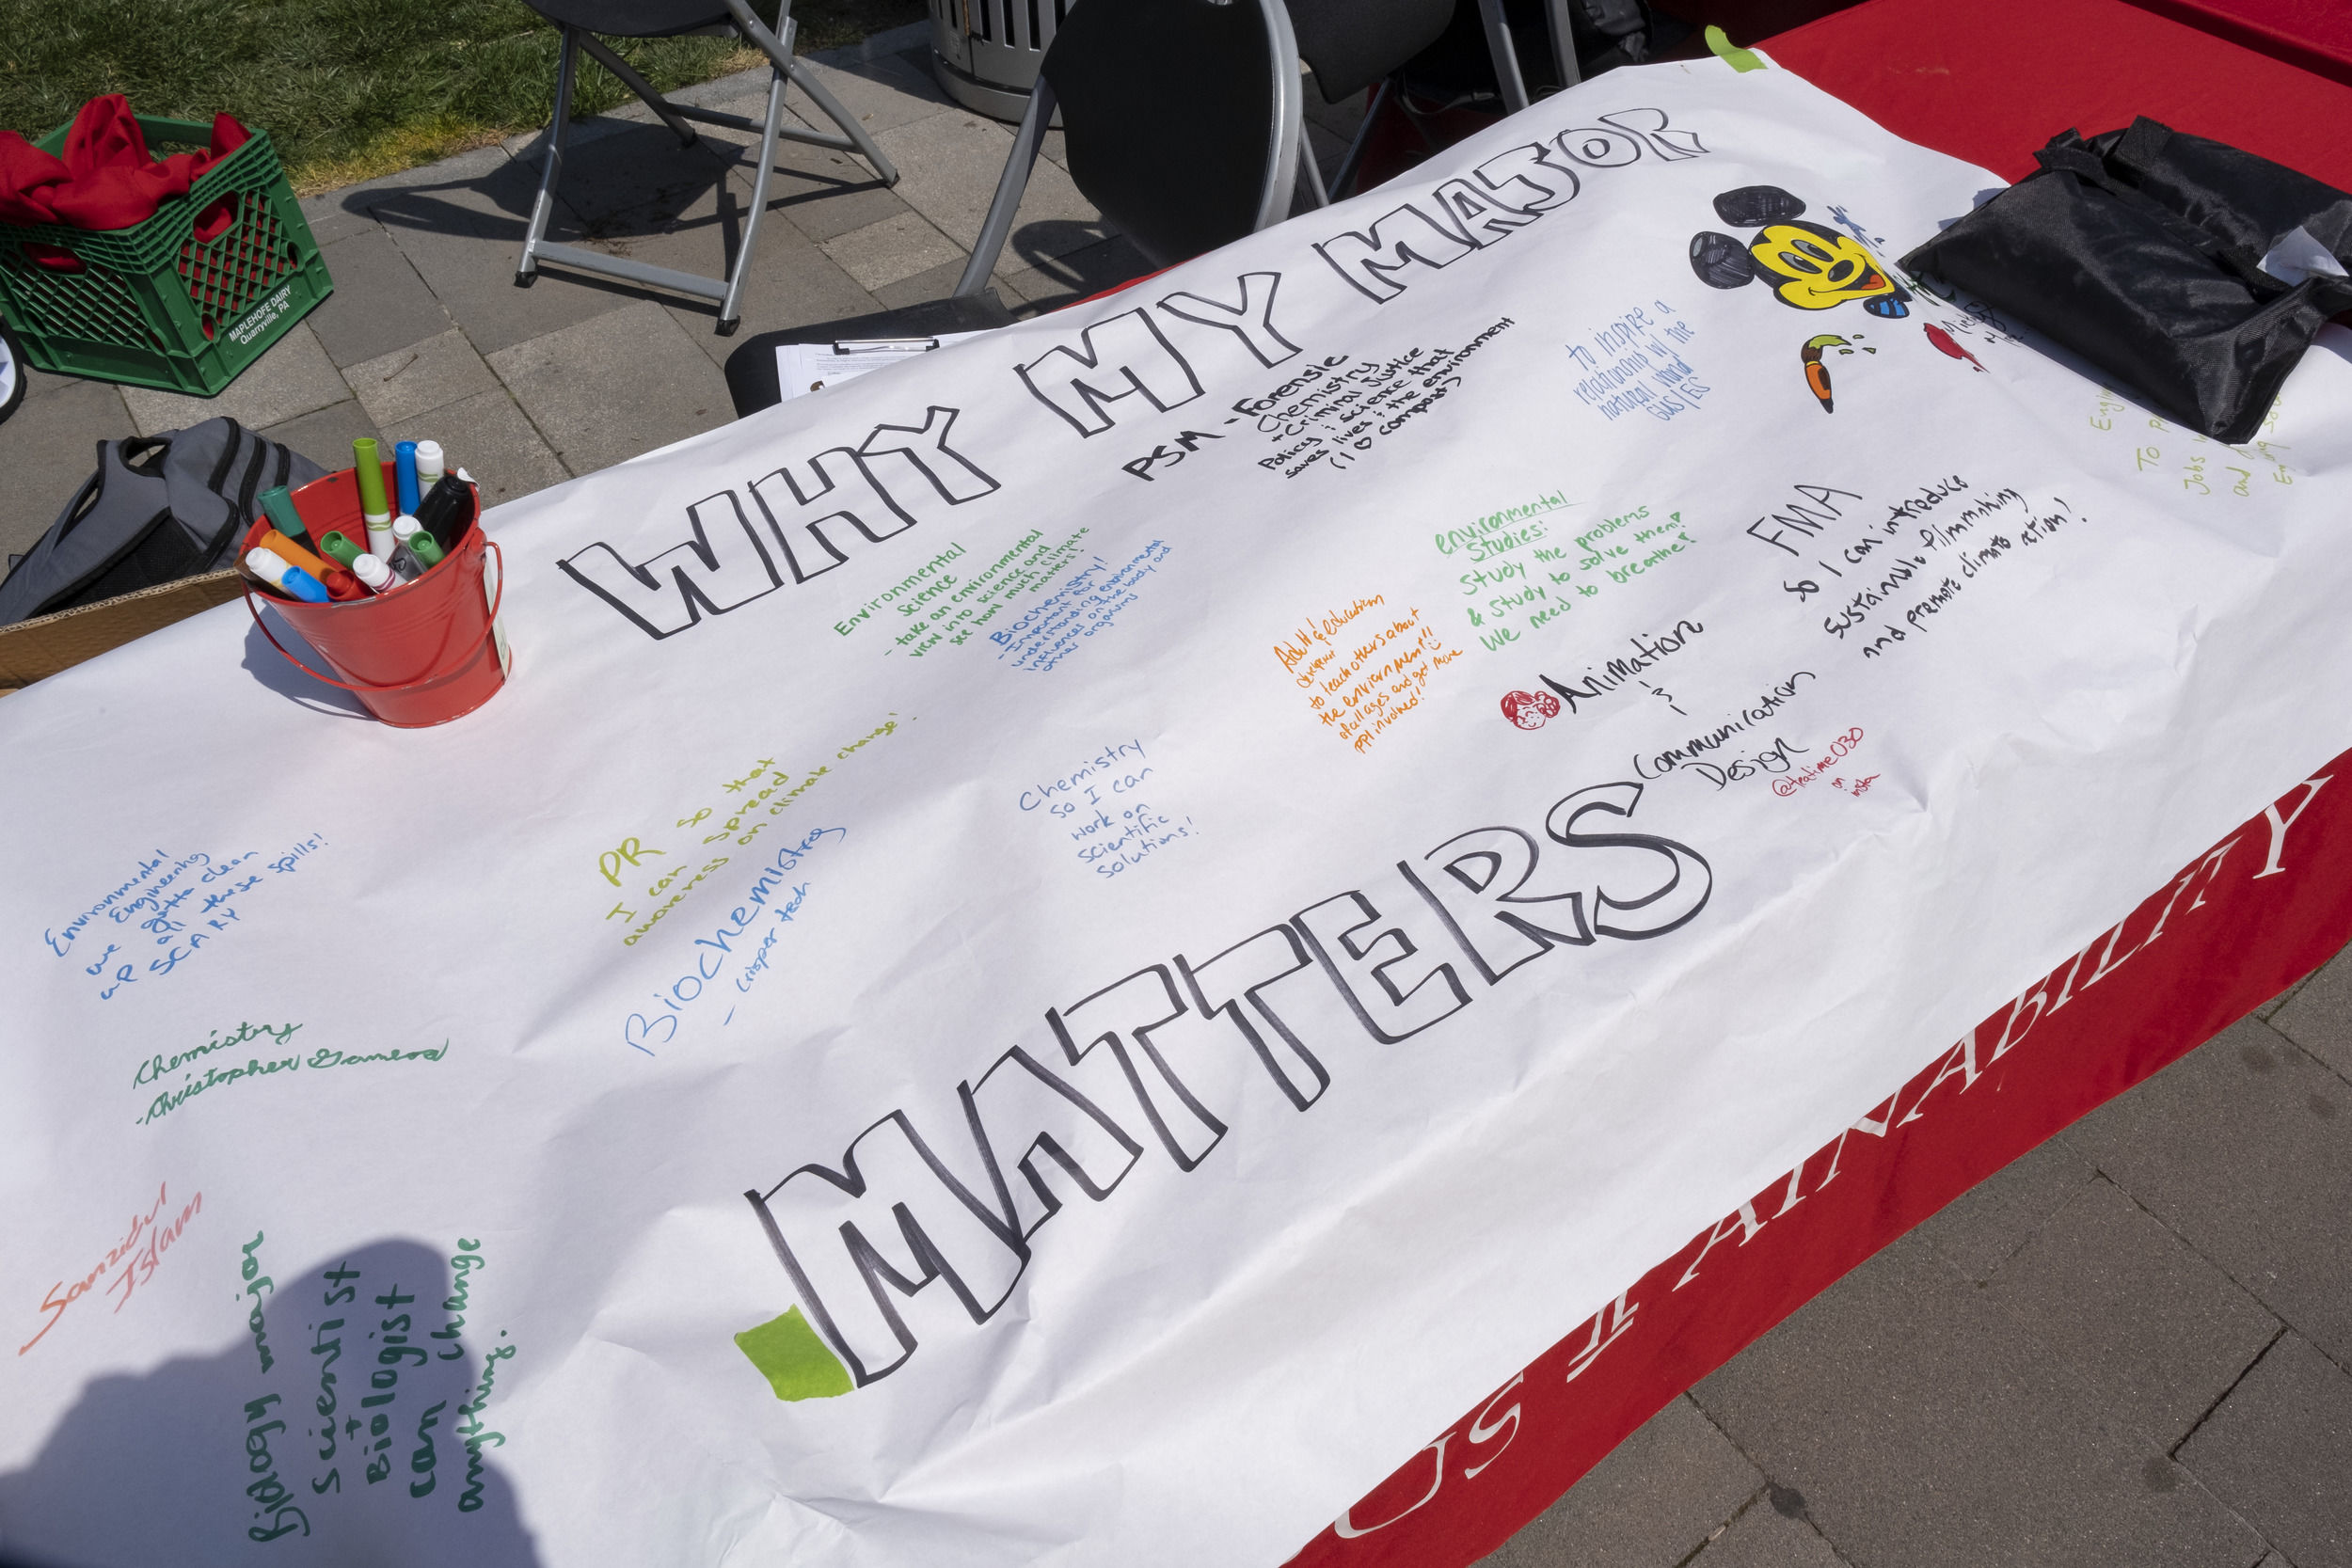 Banner signed by students including their majors and why sustainability matters to them.